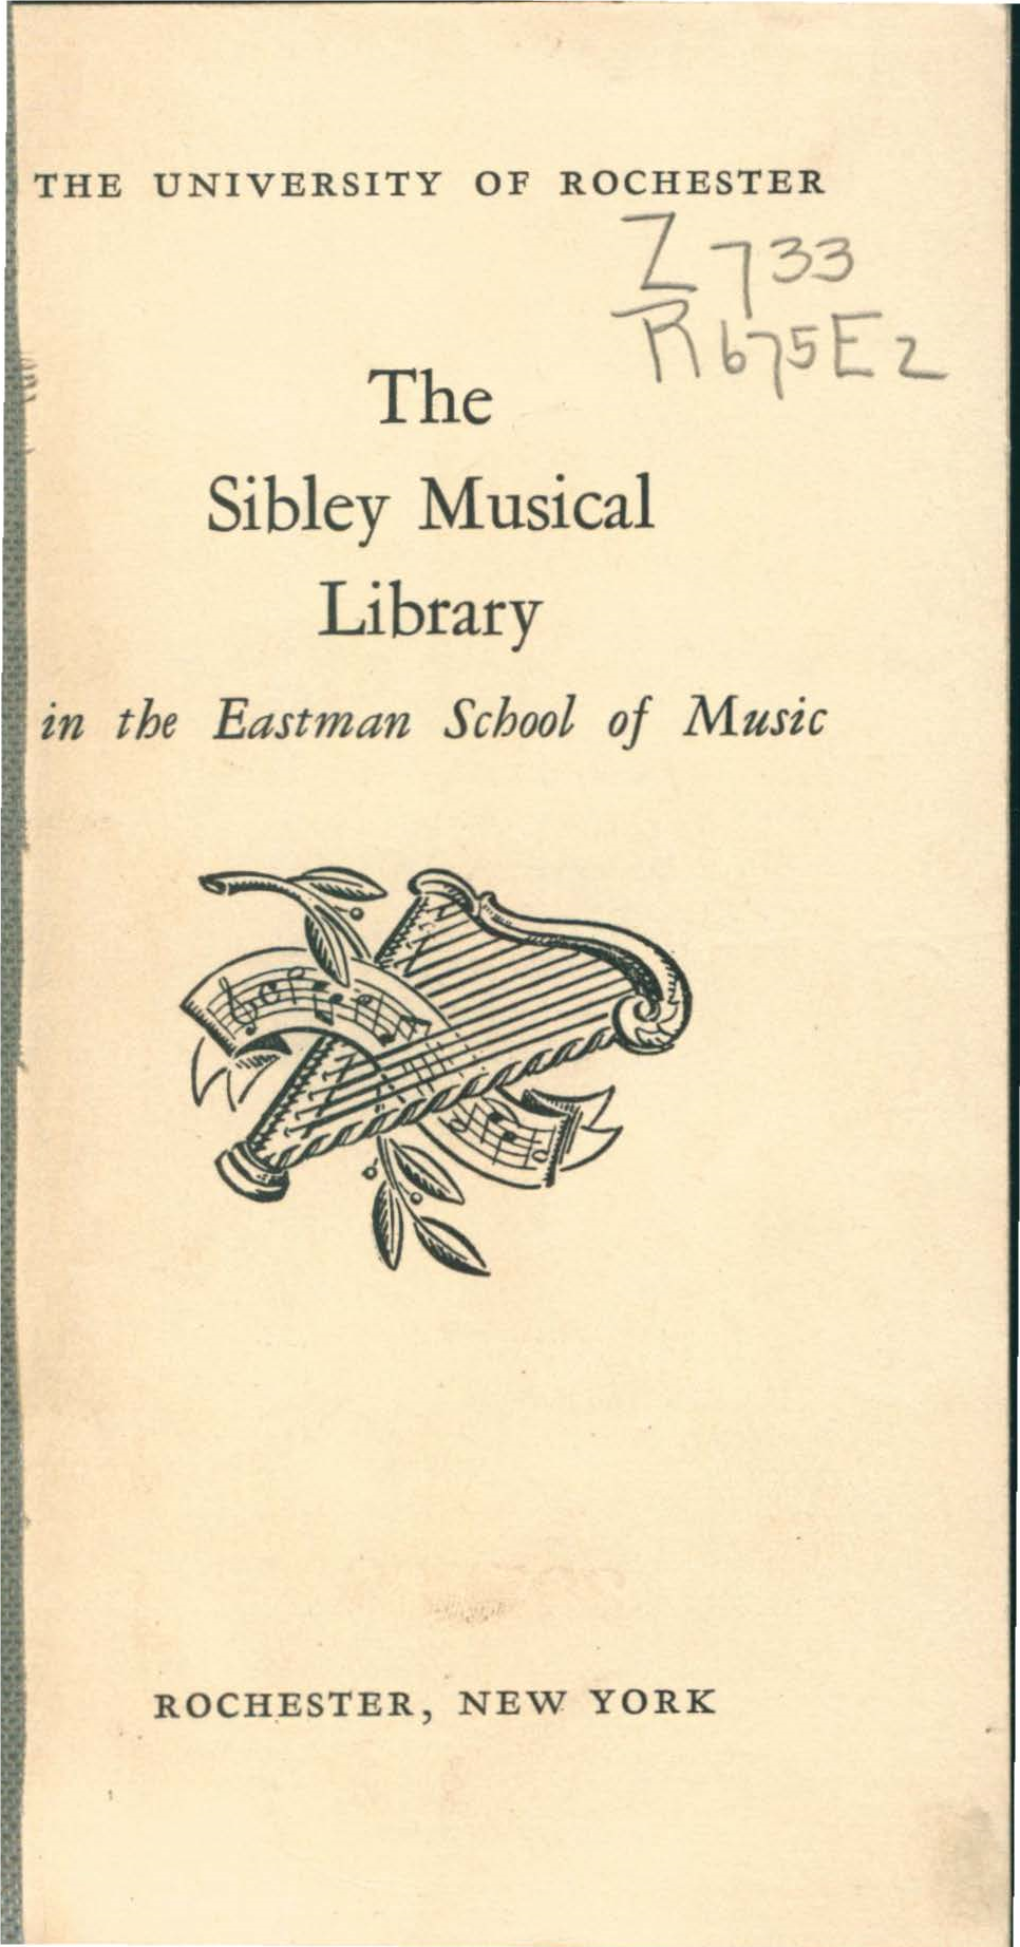 The Sibley Musical Library in the Eastman School of Music